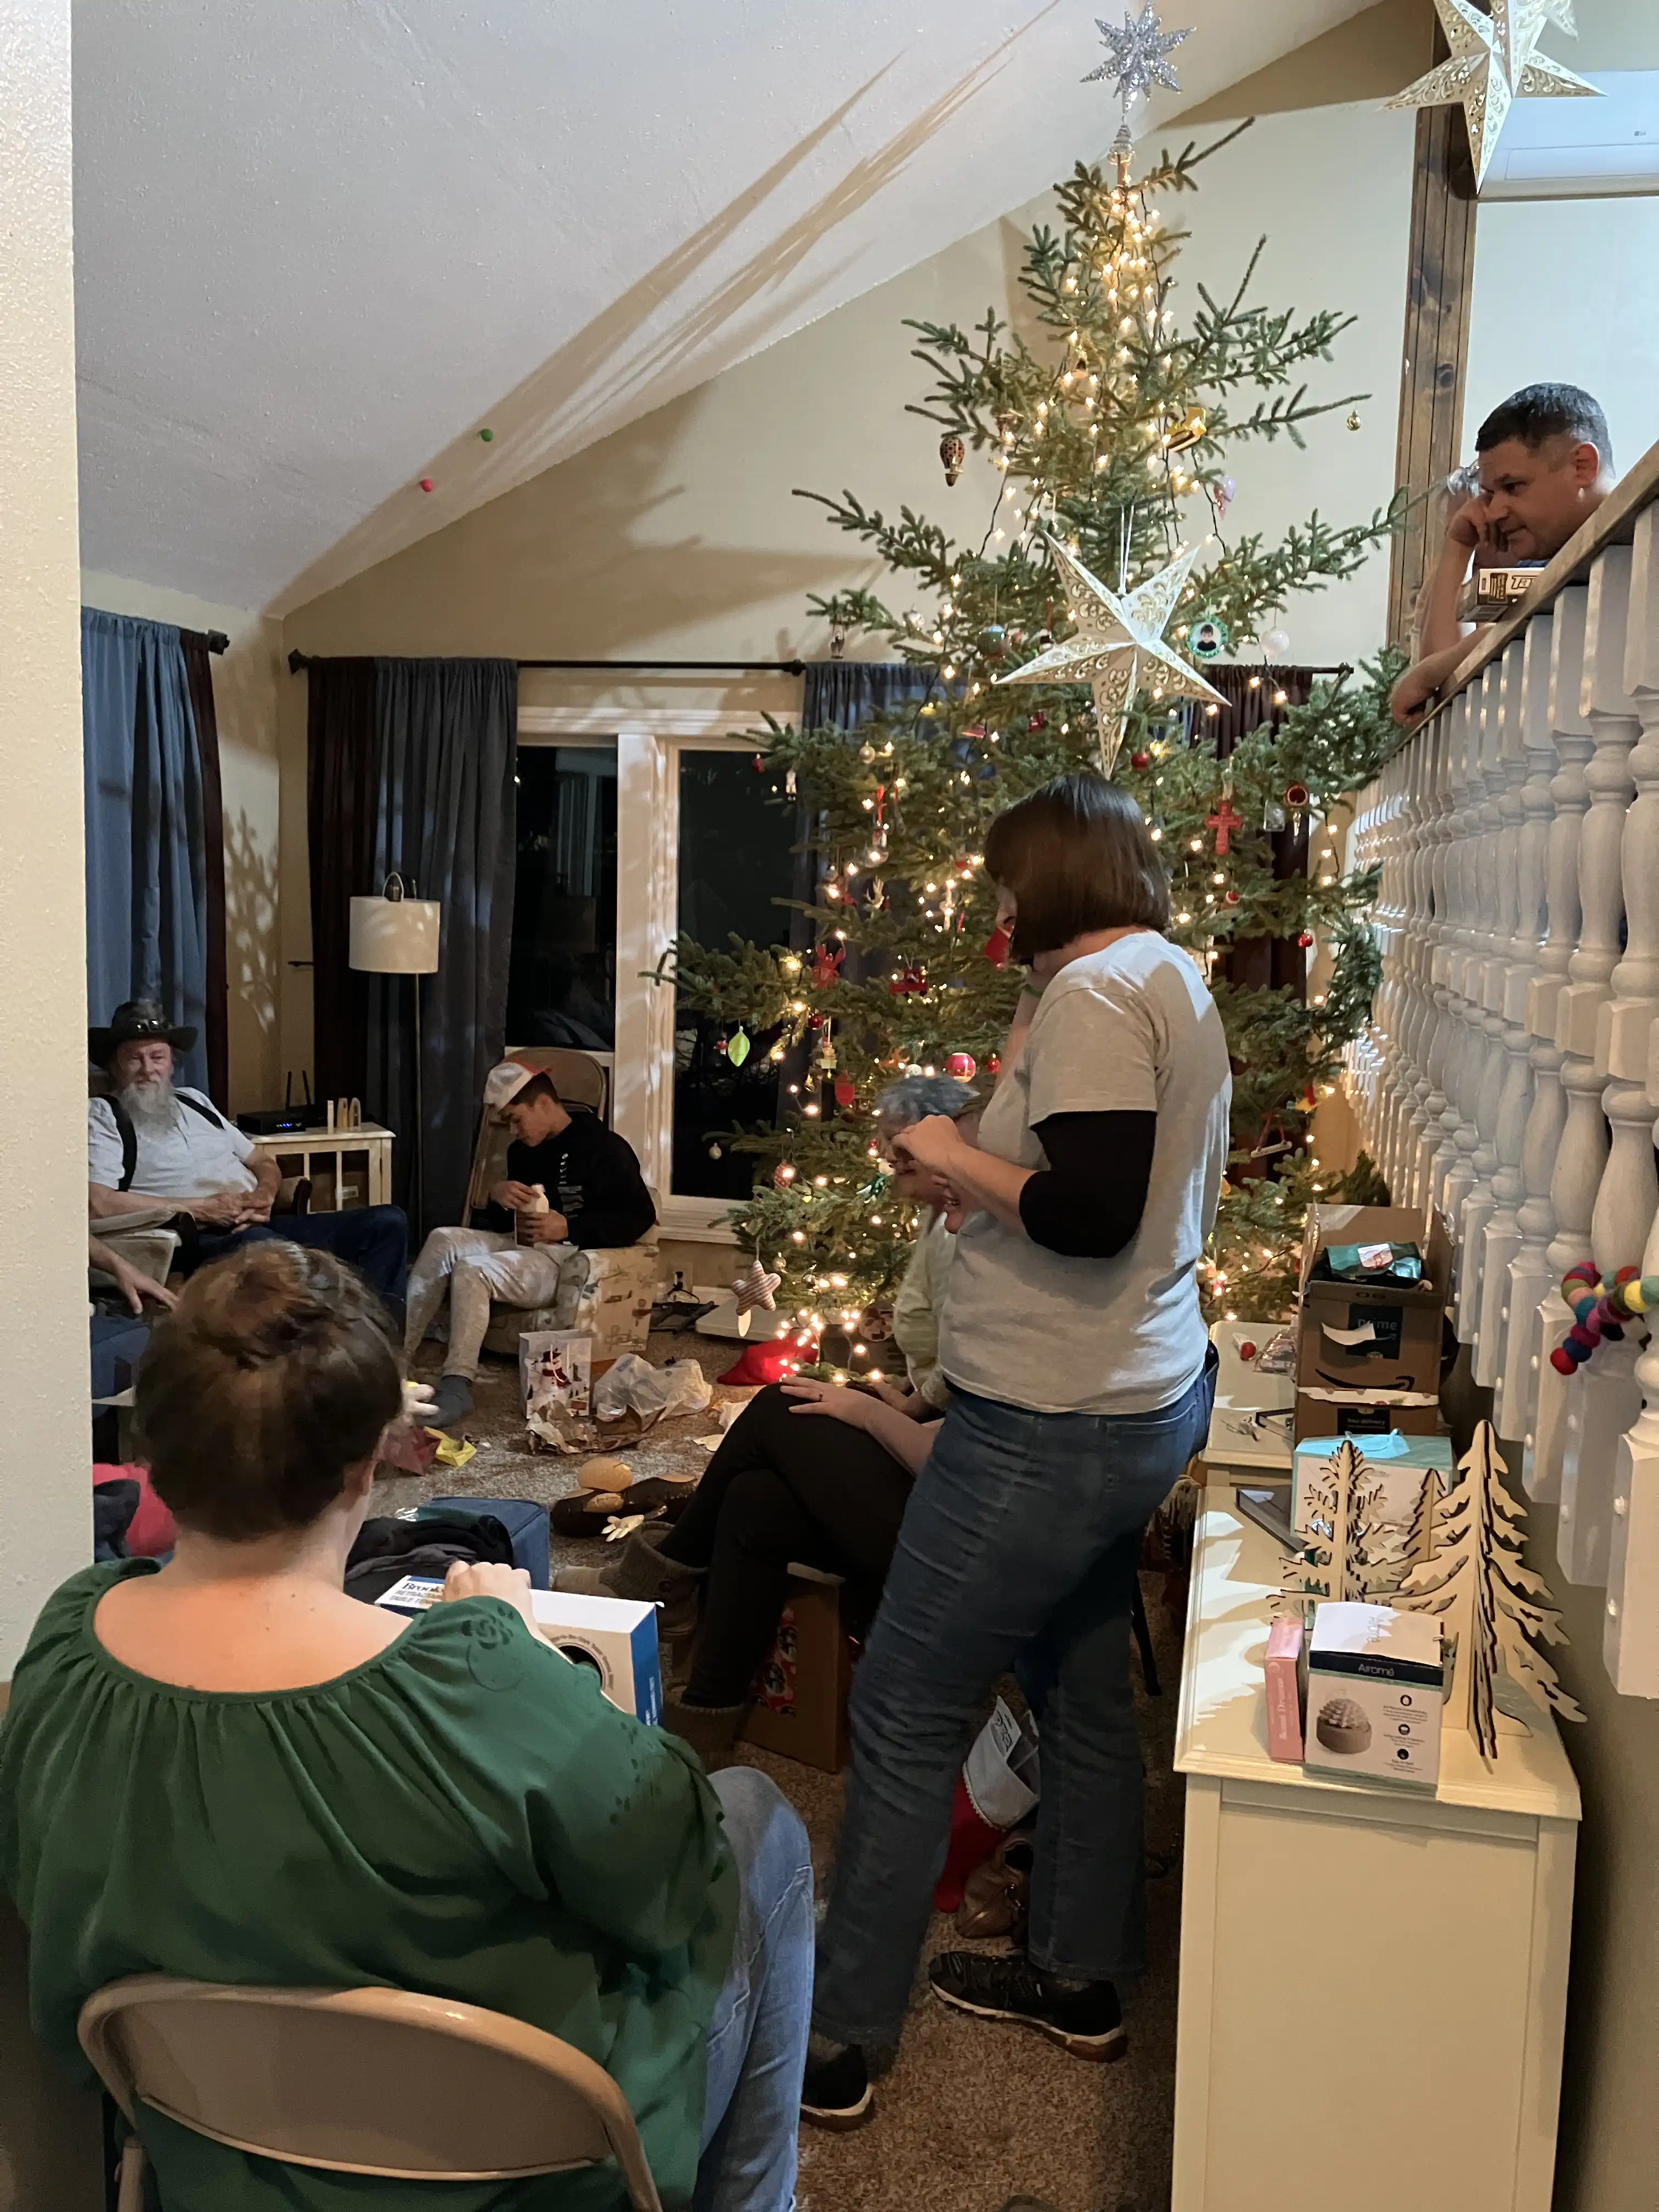 Everyone in the living room opening white elephant gifts.